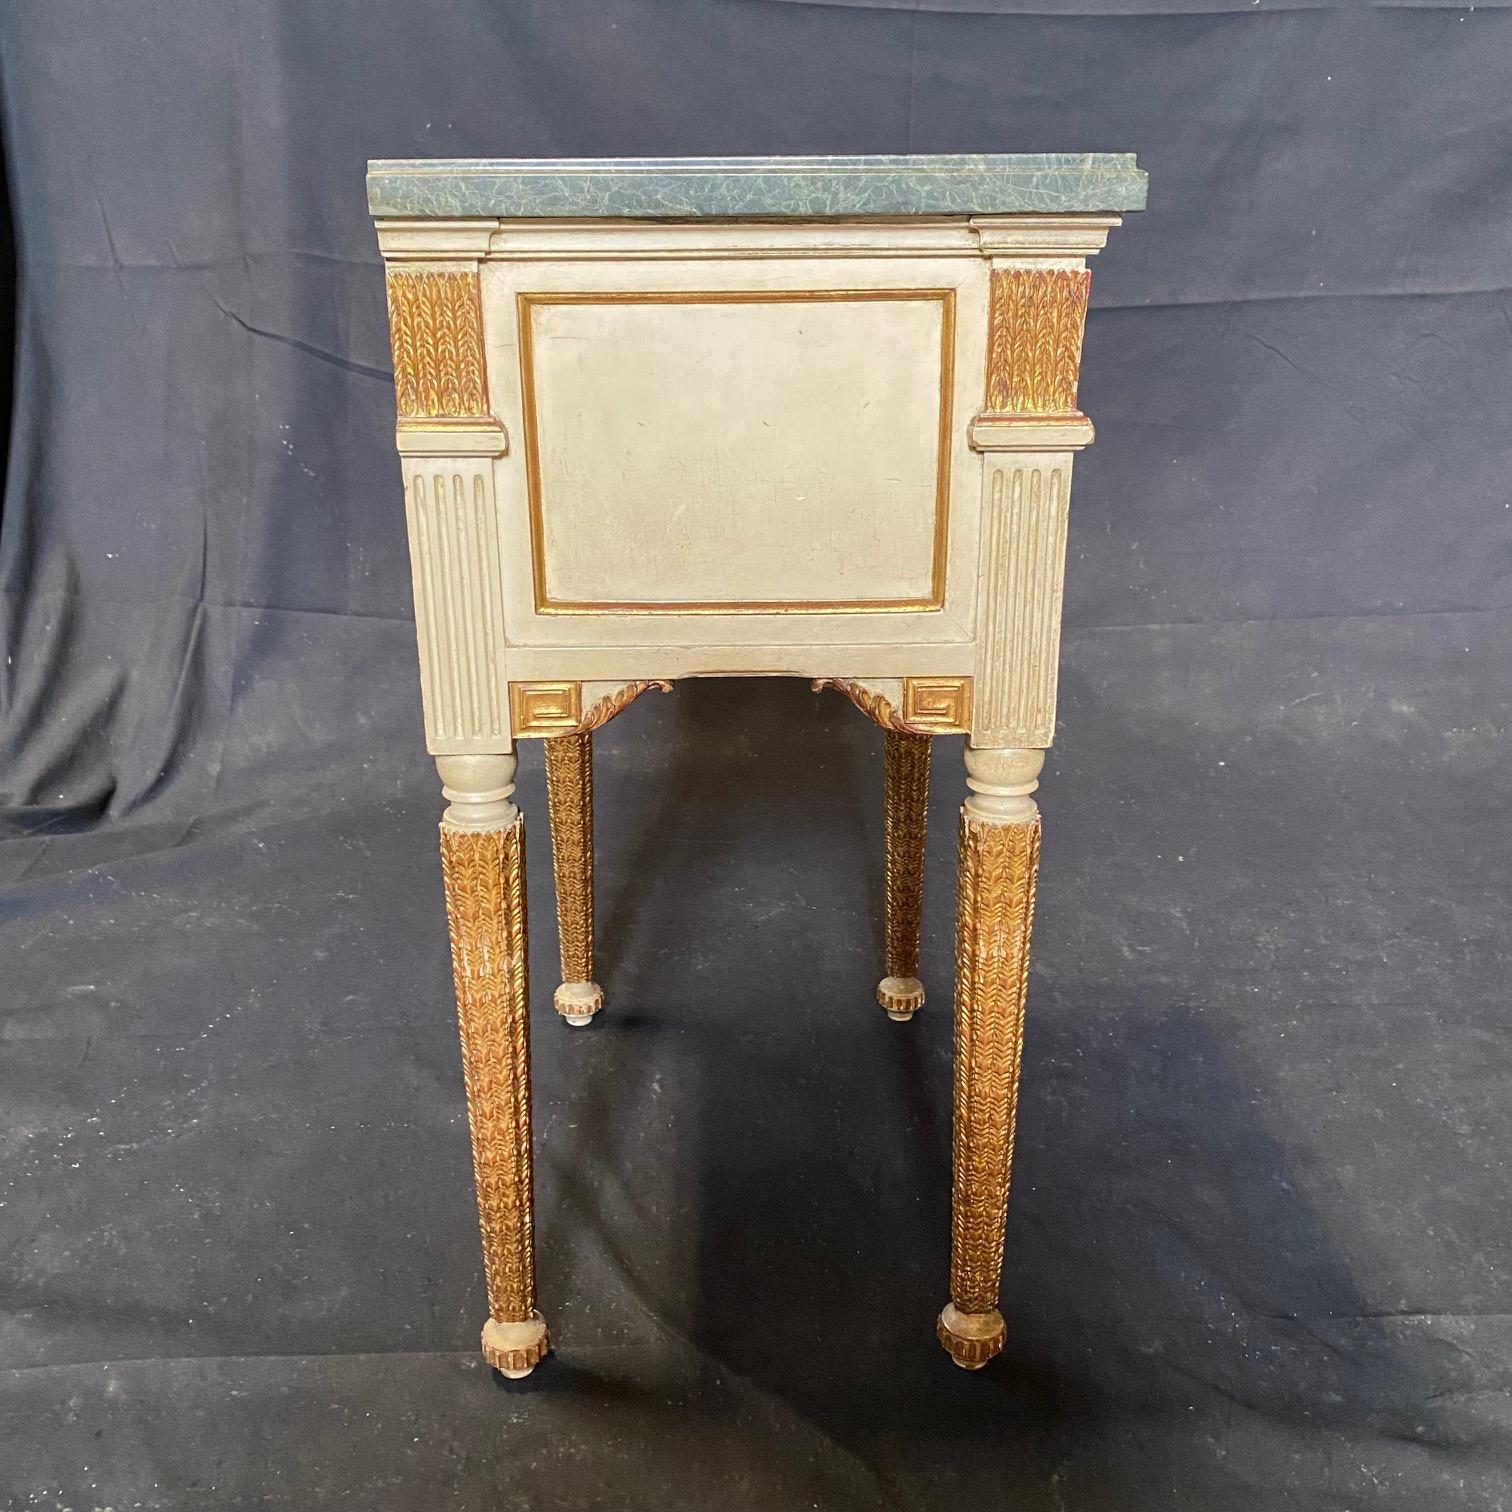 A French pair of neoclassical painted wood nightstands, bedside tables or side chests with original gold gilt and grayish ivory paint.  Each has lovely original marble tops, which rest above stunningly carved gold gilt friezes, all over hand